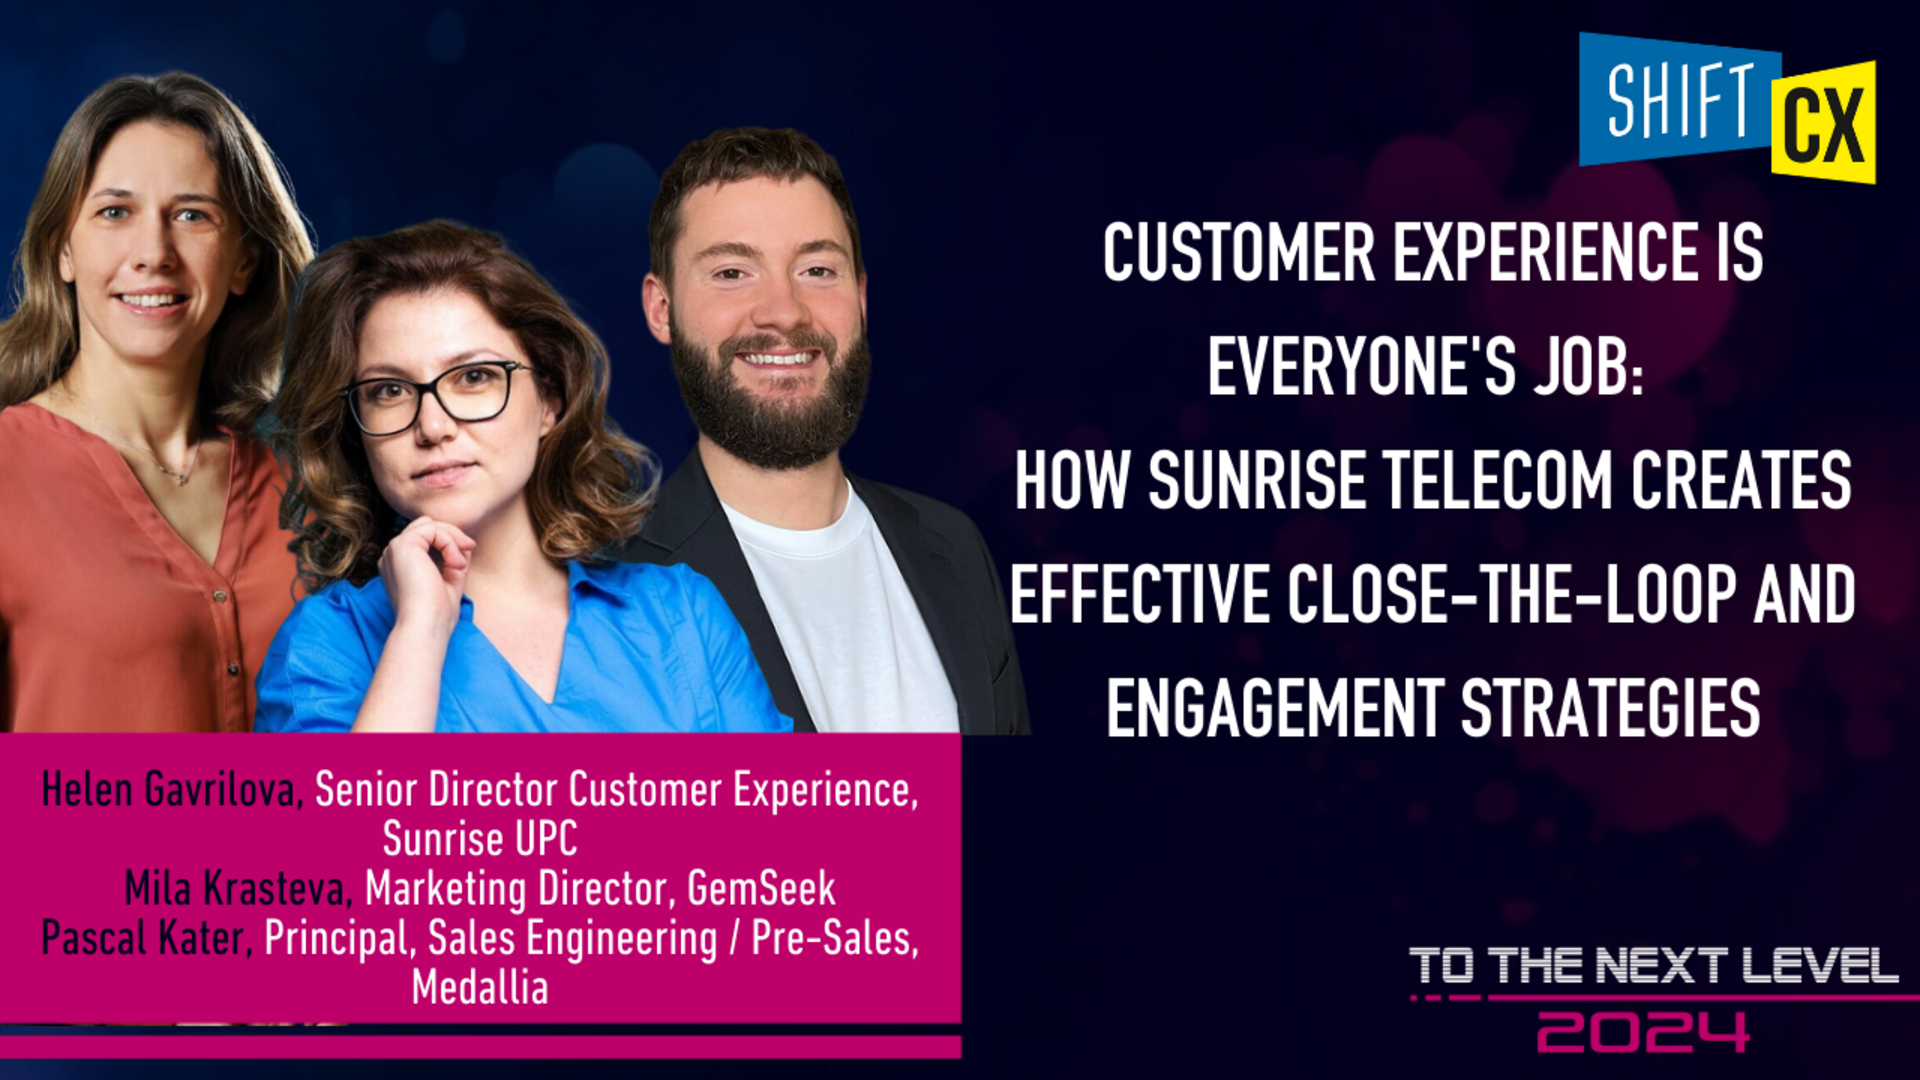 Customer Experience Is Everyone's Job: How Sunrise Telecom Creates Effective Close-The-Loop And Engagement Strategies